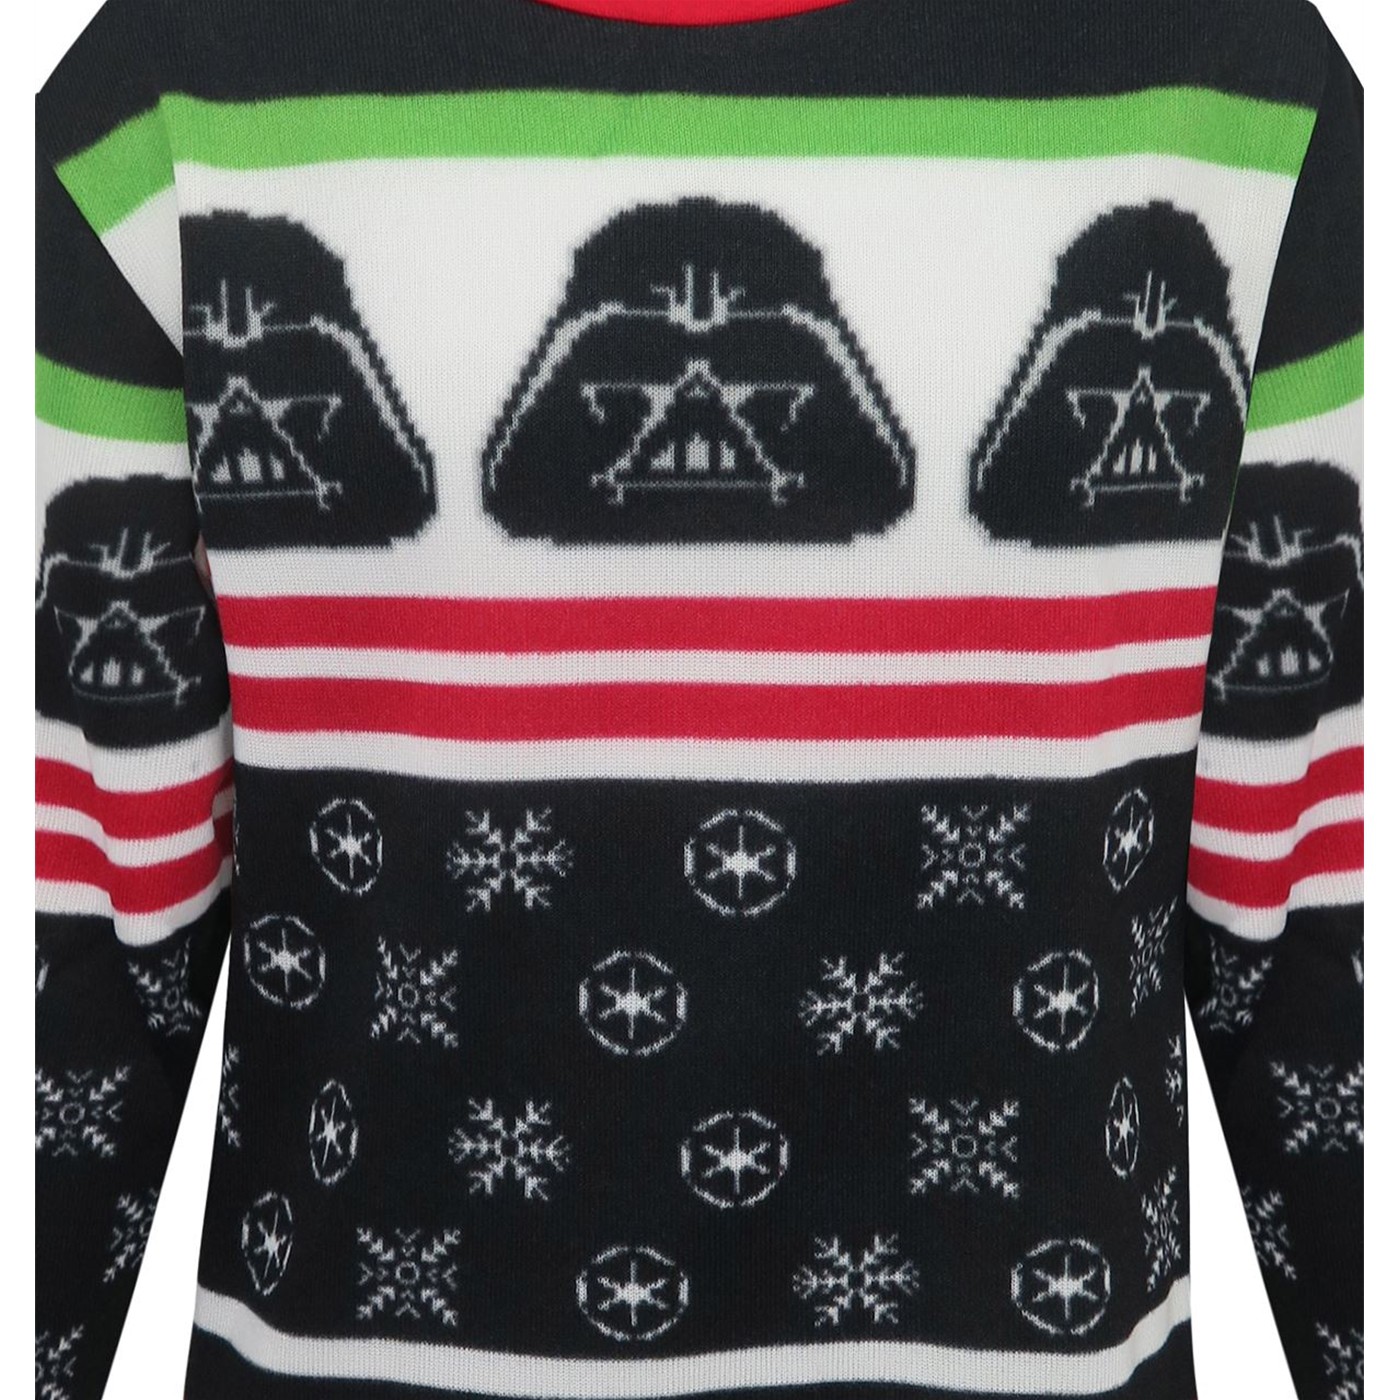 Star Wars Darth Vader Simply Ugly Men's Christmas Sweater